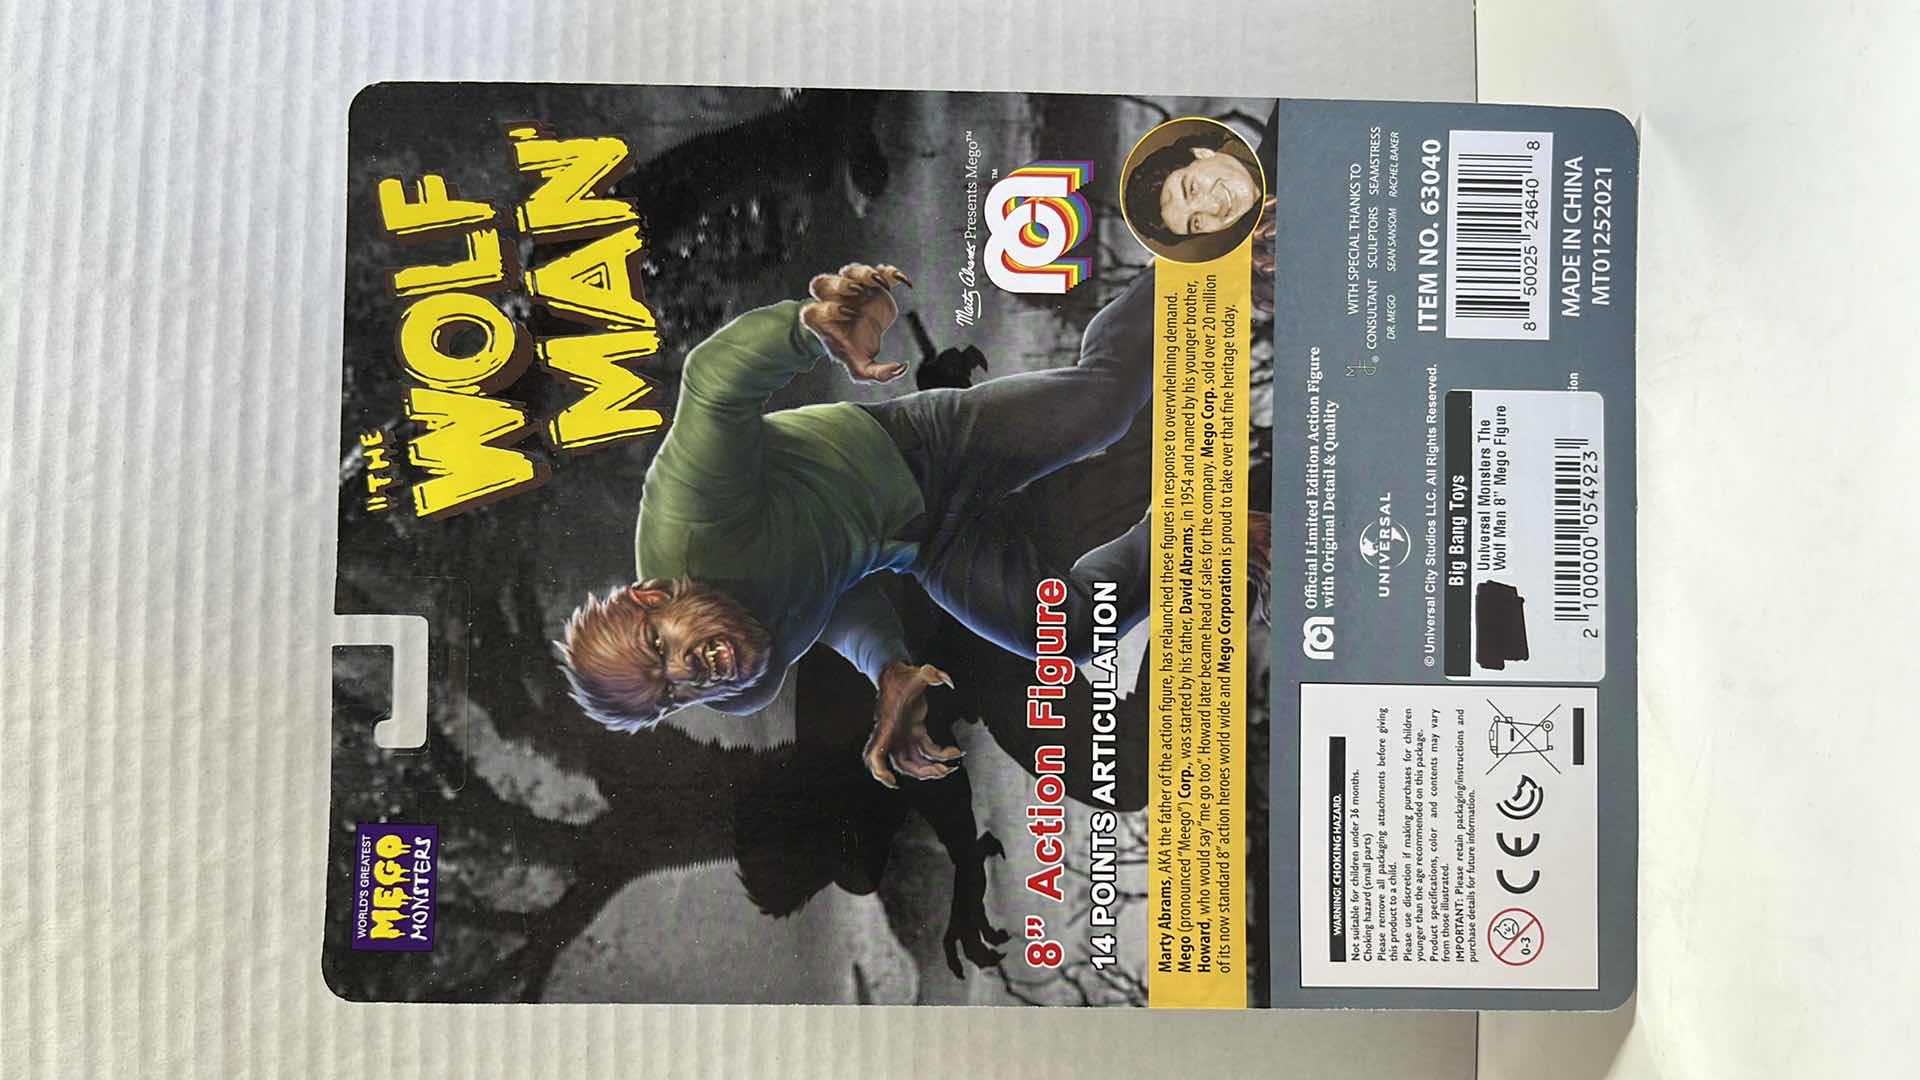 Photo 5 of NIB WORLDS GREATEST MEGO MONSTERS 8” ACTION FIGURE, CREATURE FROM THE BLACK LAGOON & THE WOLF MAN (2)